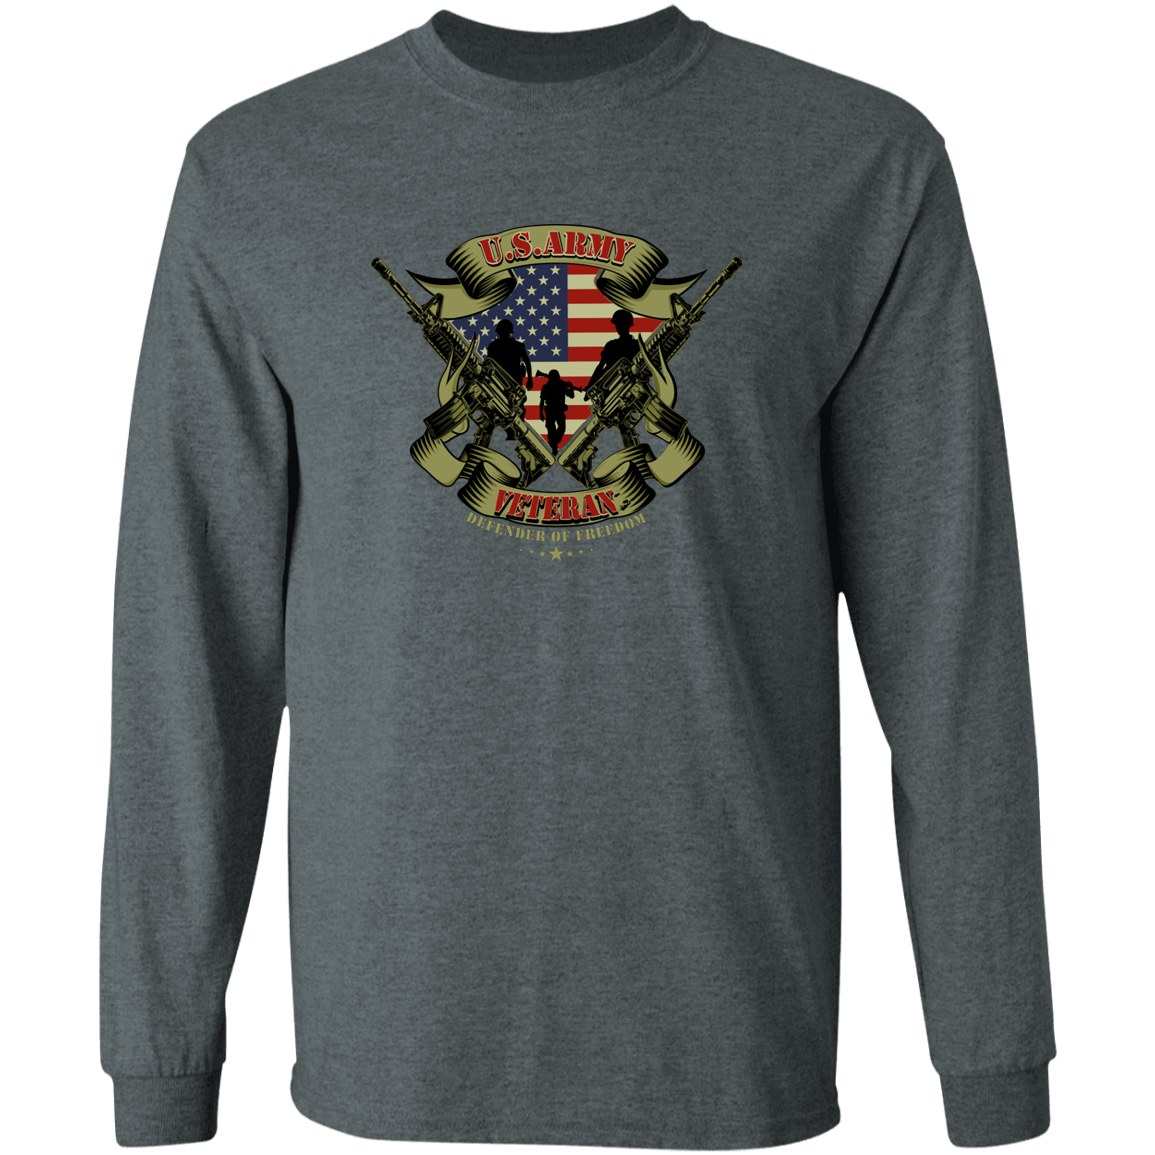 US ARMY VETERAN Defender of Freedom Ultra Cotton T-Shirt